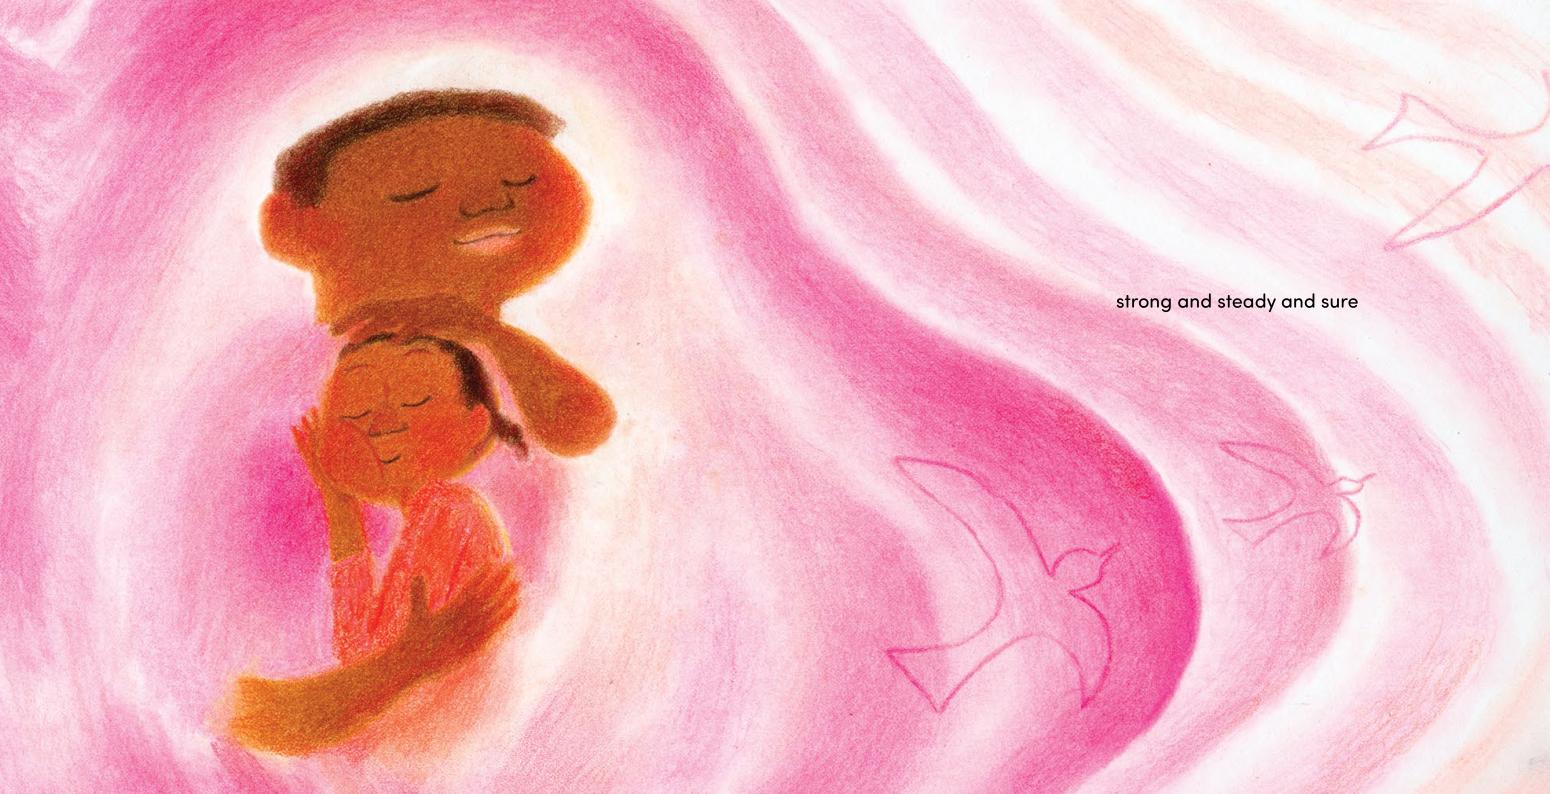 A caregiver and child embrace, surrounded by swirls of pink and three soaring birds.